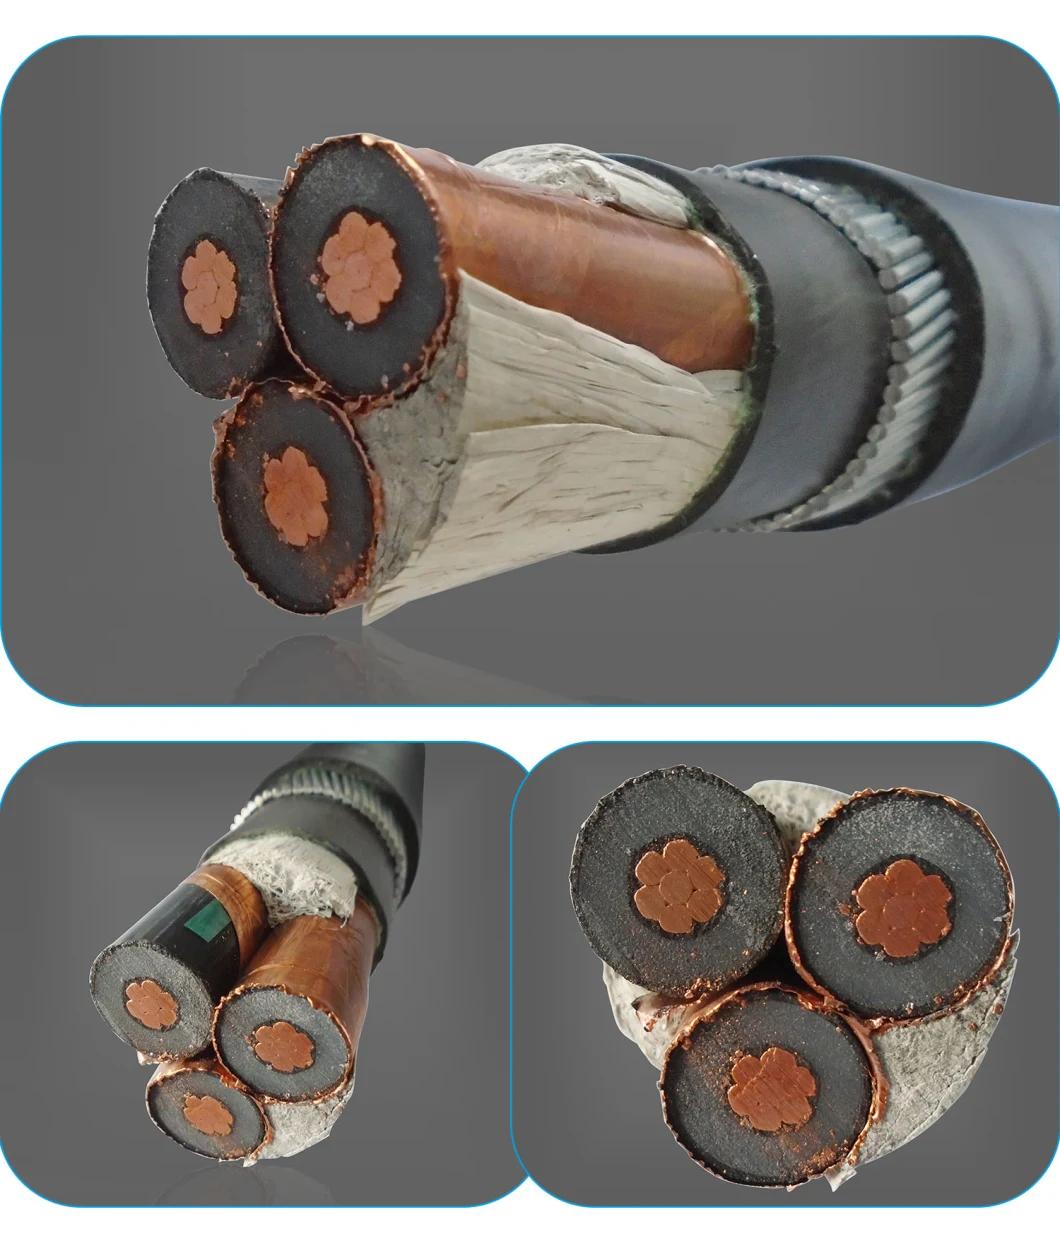 Copper Tape Screen Wrapped Middle Voltage PVC/PE Sheathed XLPE Insulated Cable